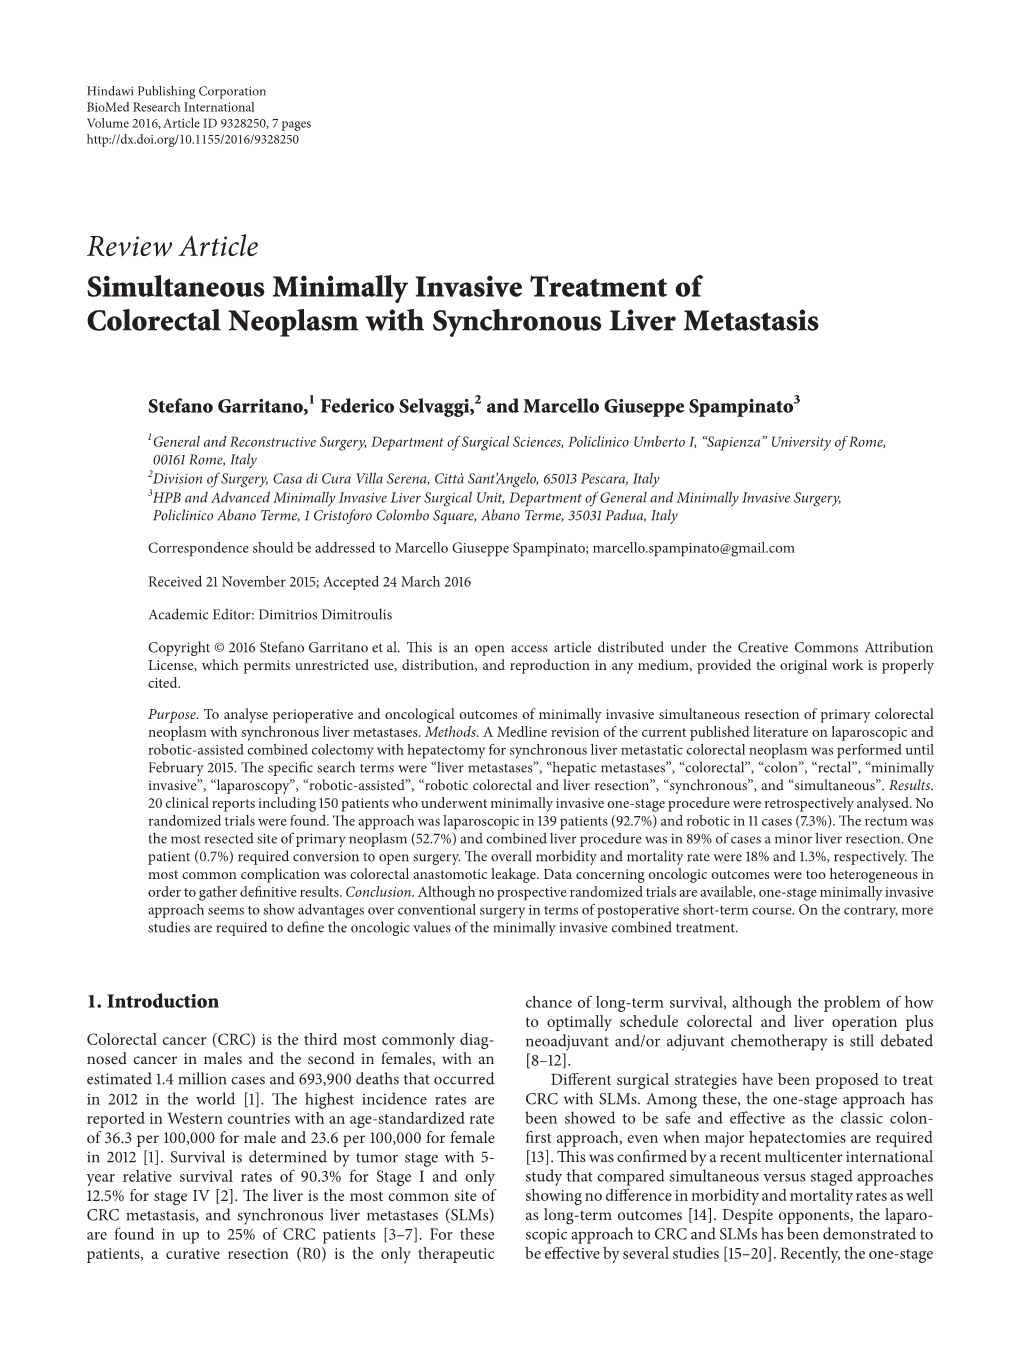 Review Article Simultaneous Minimally Invasive Treatment of Colorectal Neoplasm with Synchronous Liver Metastasis